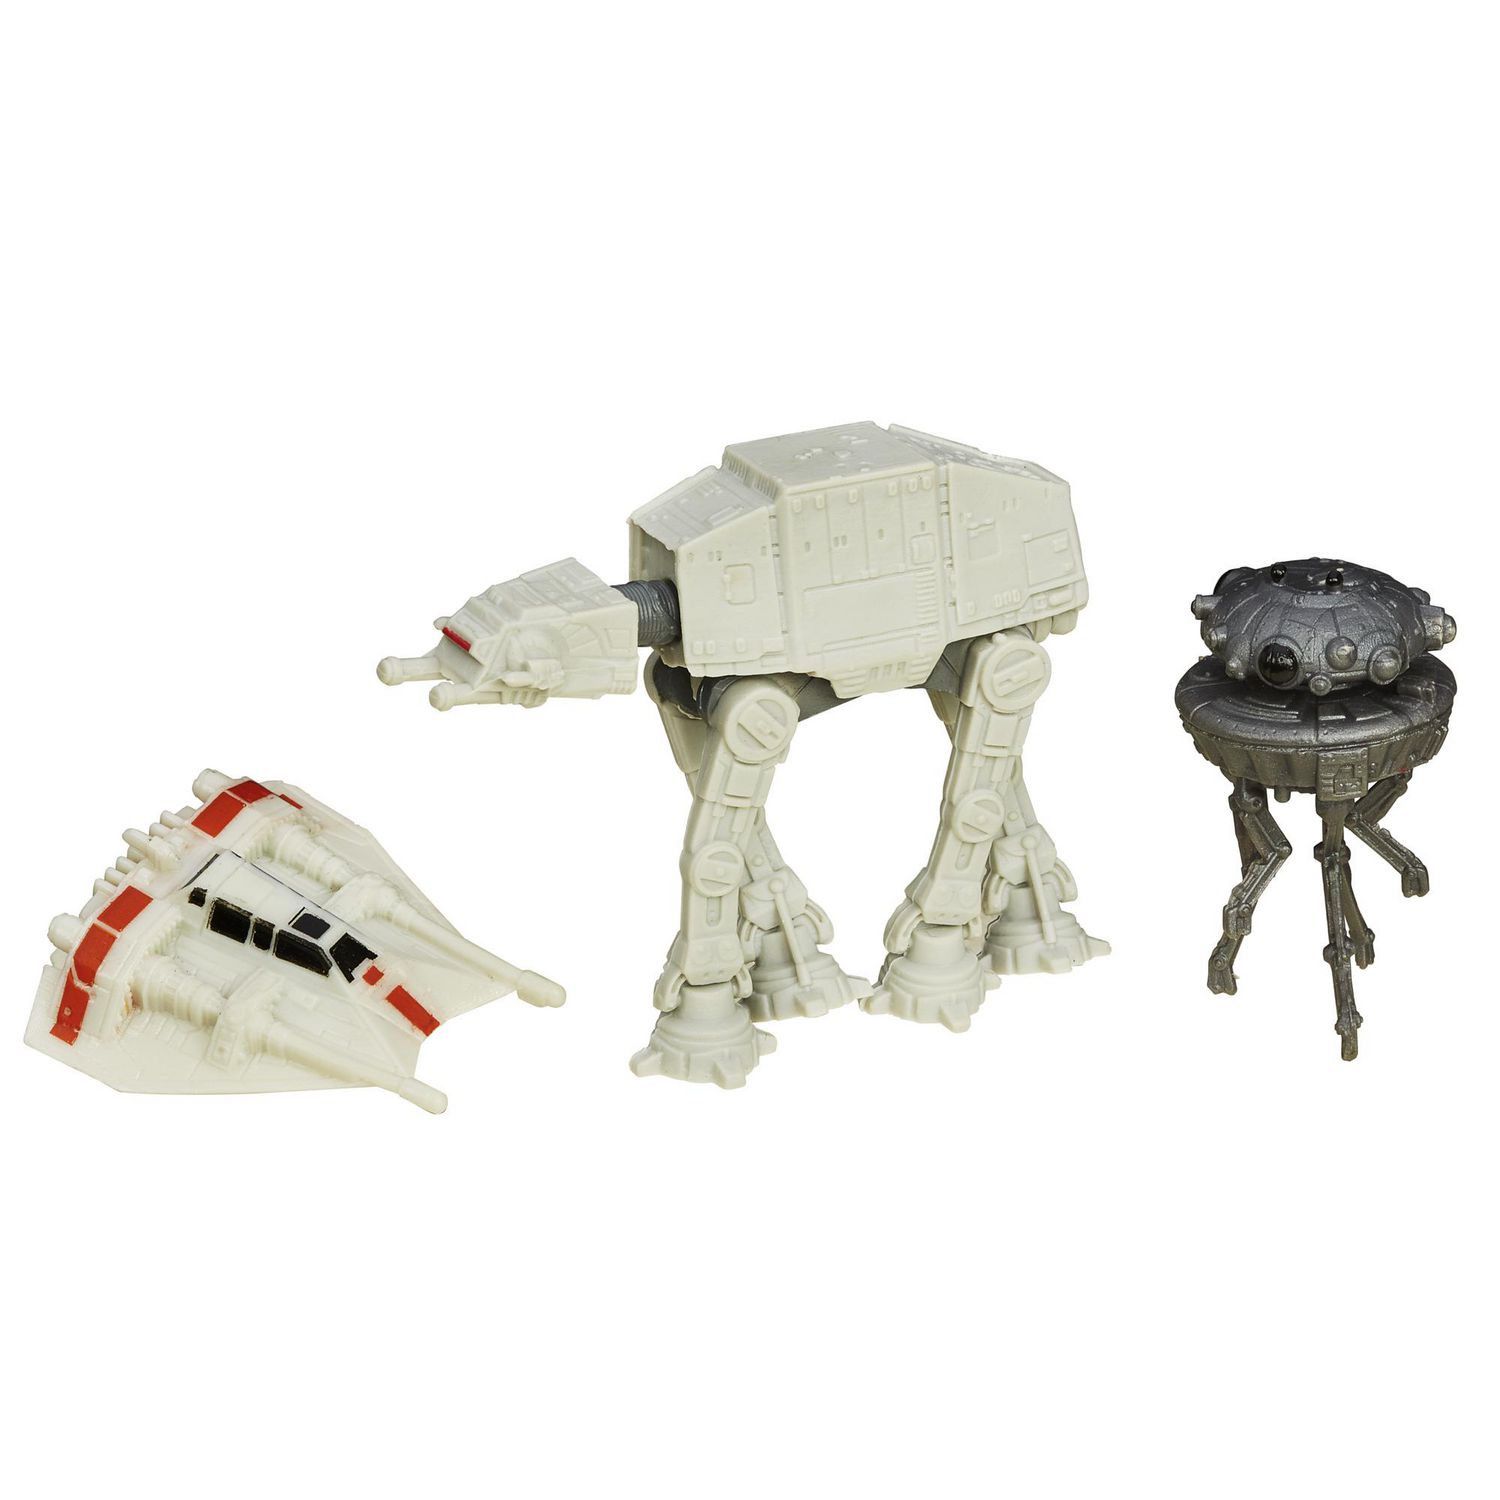 Star Wars The Empire Strikes Back Micro Machines 3 Pack